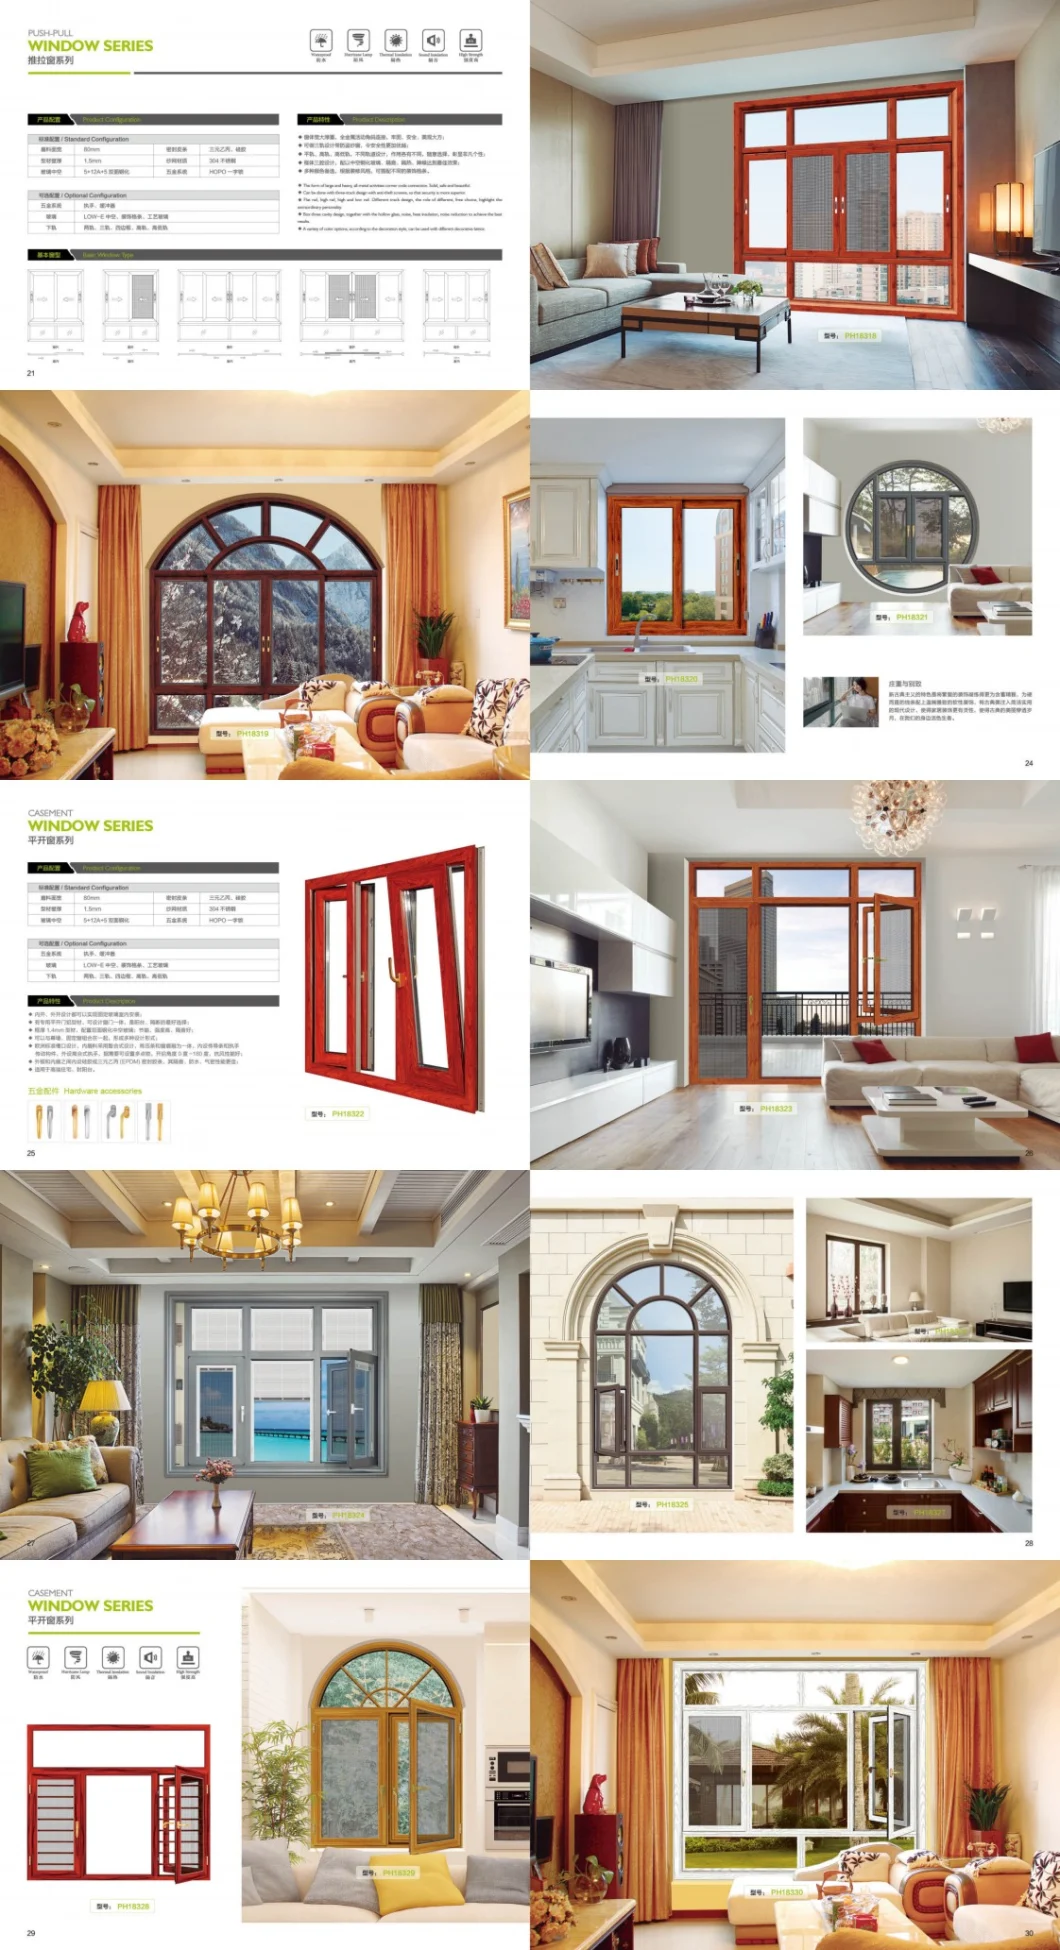 Aluminum Frame Doors and Windows with Very Thick Aluminum Profiles